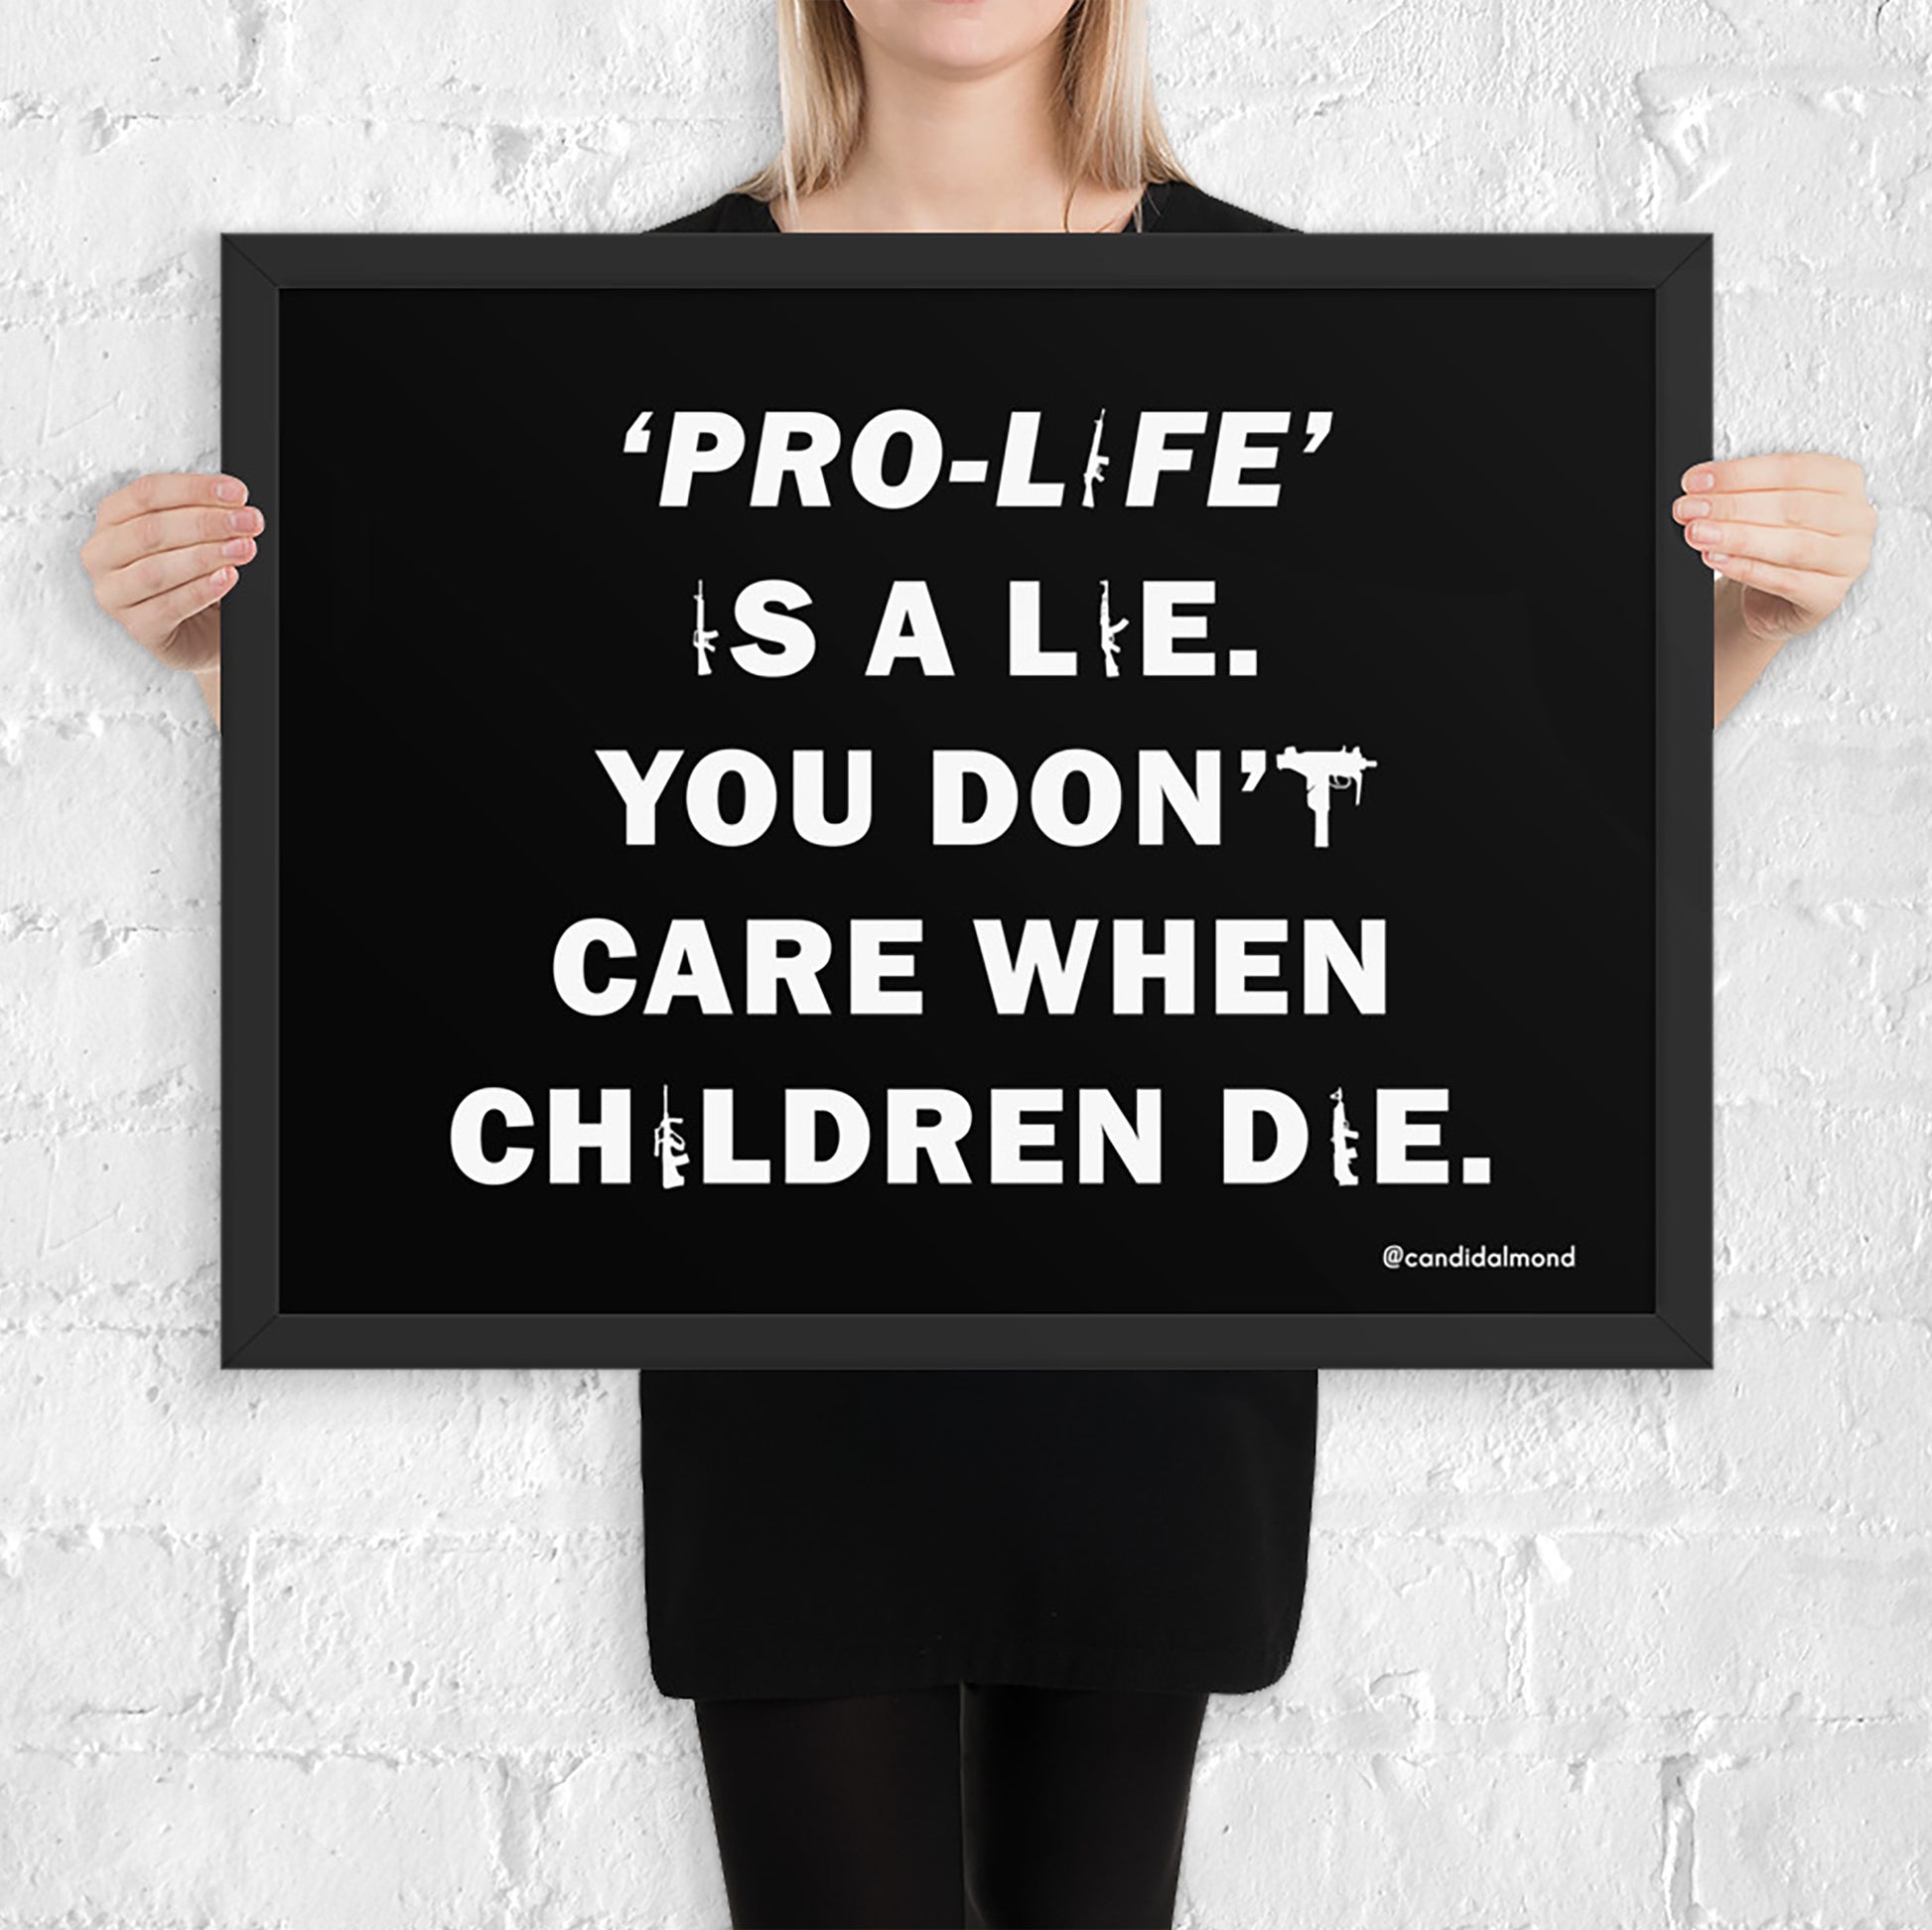 Abortion rights and gun control protest poster, black frame, size 24" x 18"